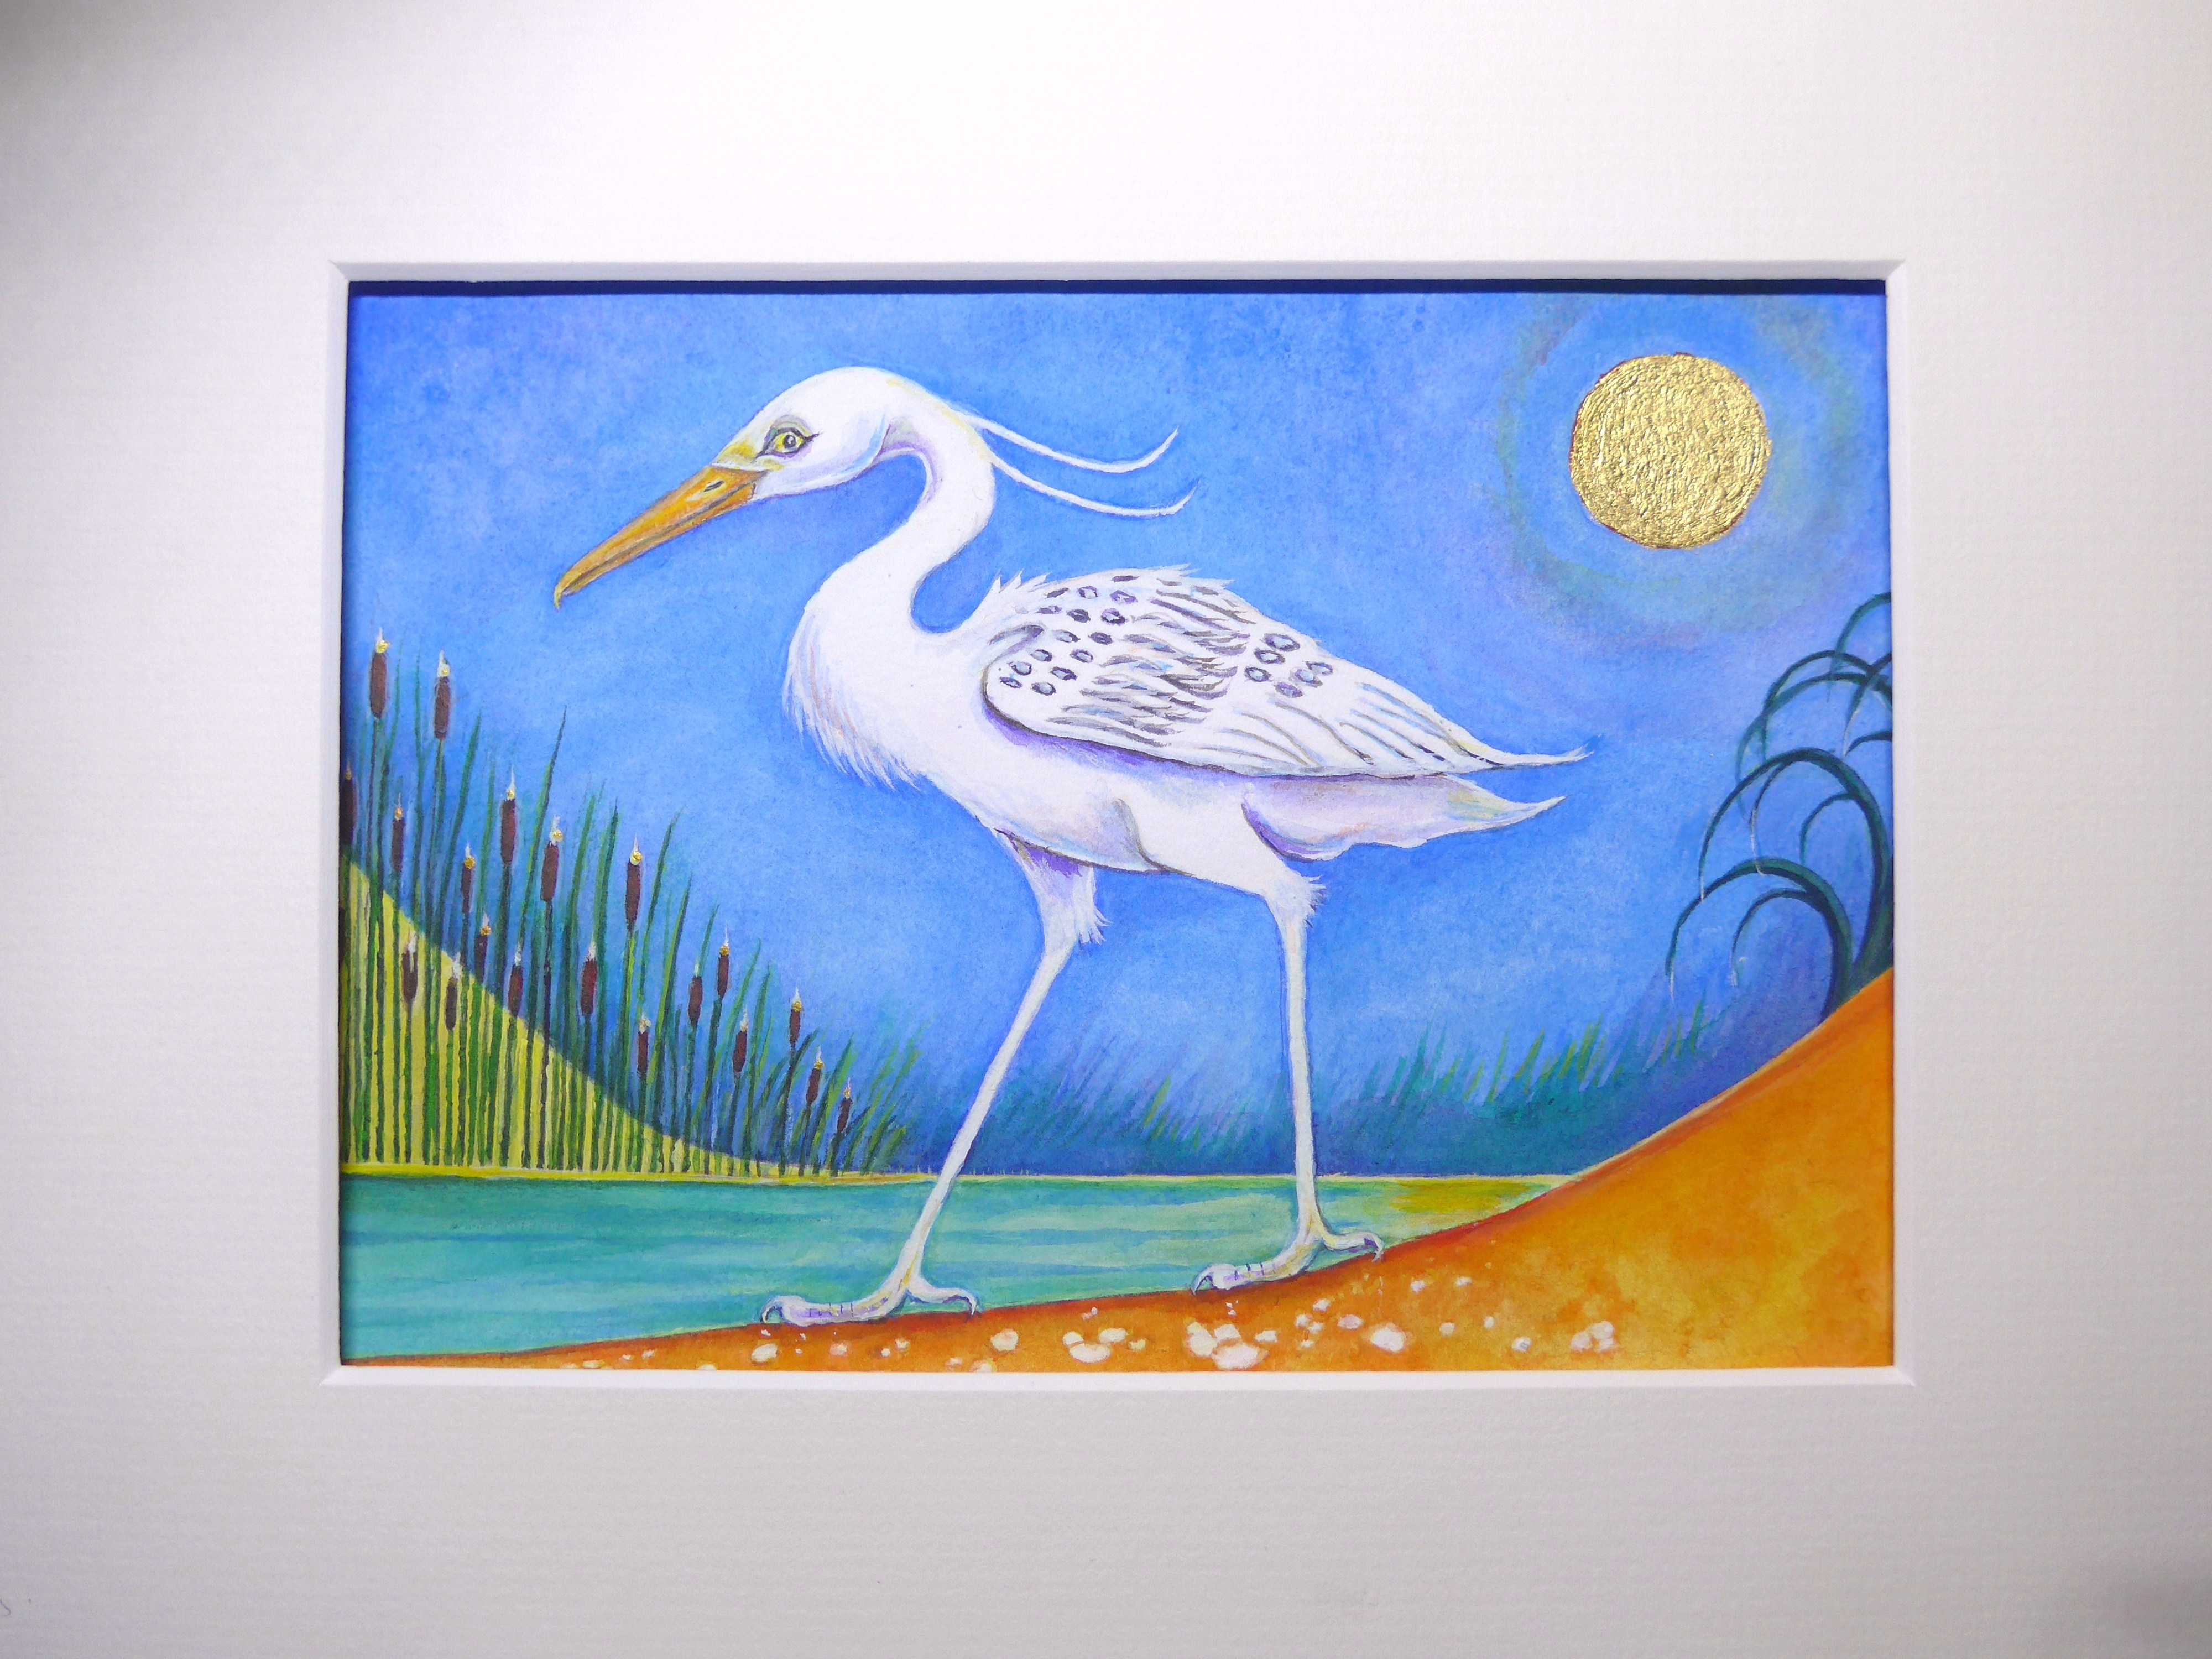 Painting of an Ibis representing Thoth in Greek mythology with a gold moon by artist Diane Young